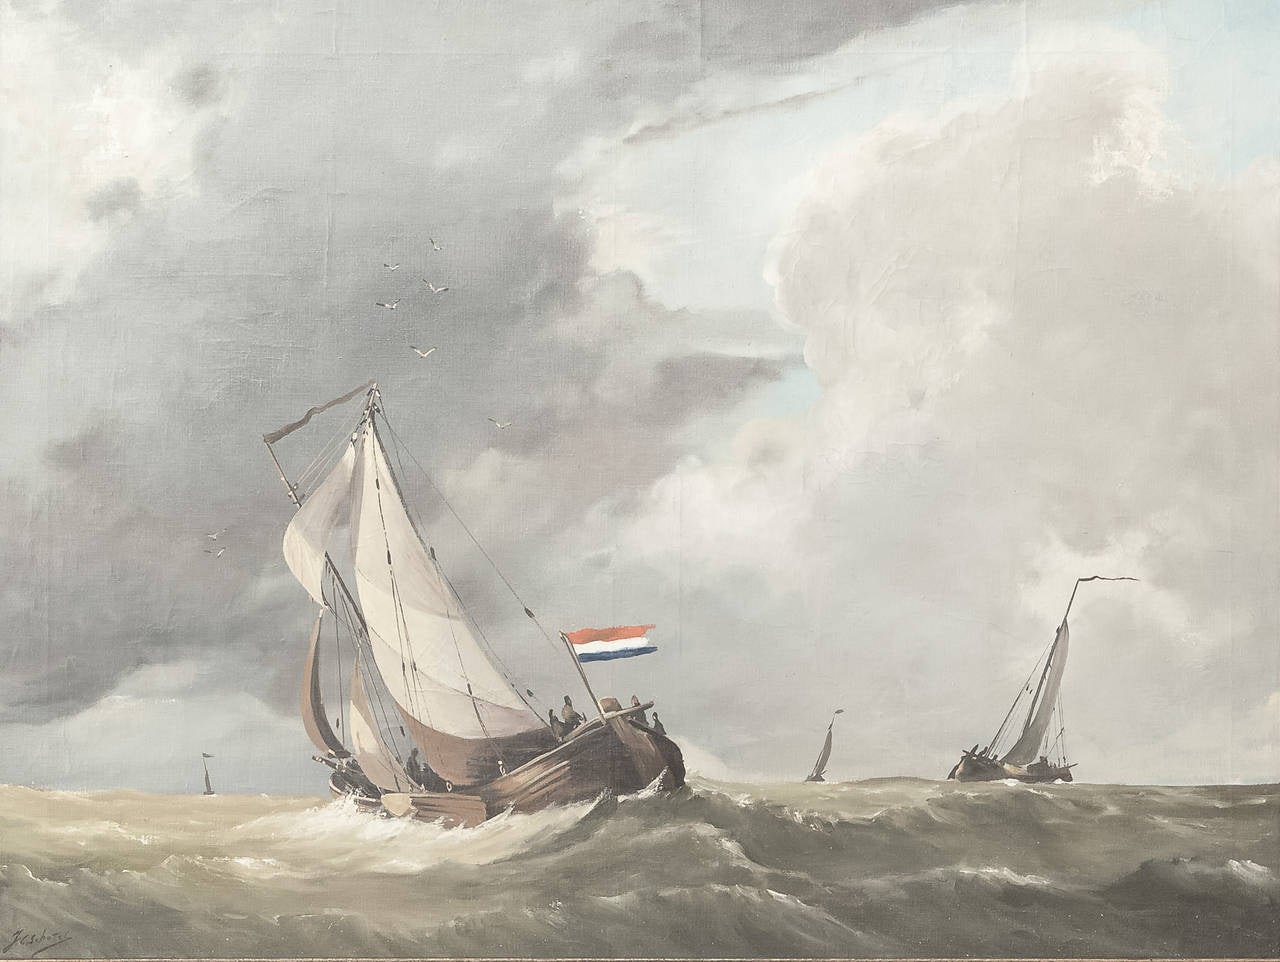 This framed oil painting on canvas by J. C. Sebotel is a superlative example of man's maritime exploits, utilizing the wind to conquer the waves in small boats. Note how the artist has captured the wisps of sunlight gleaming through the waves, with